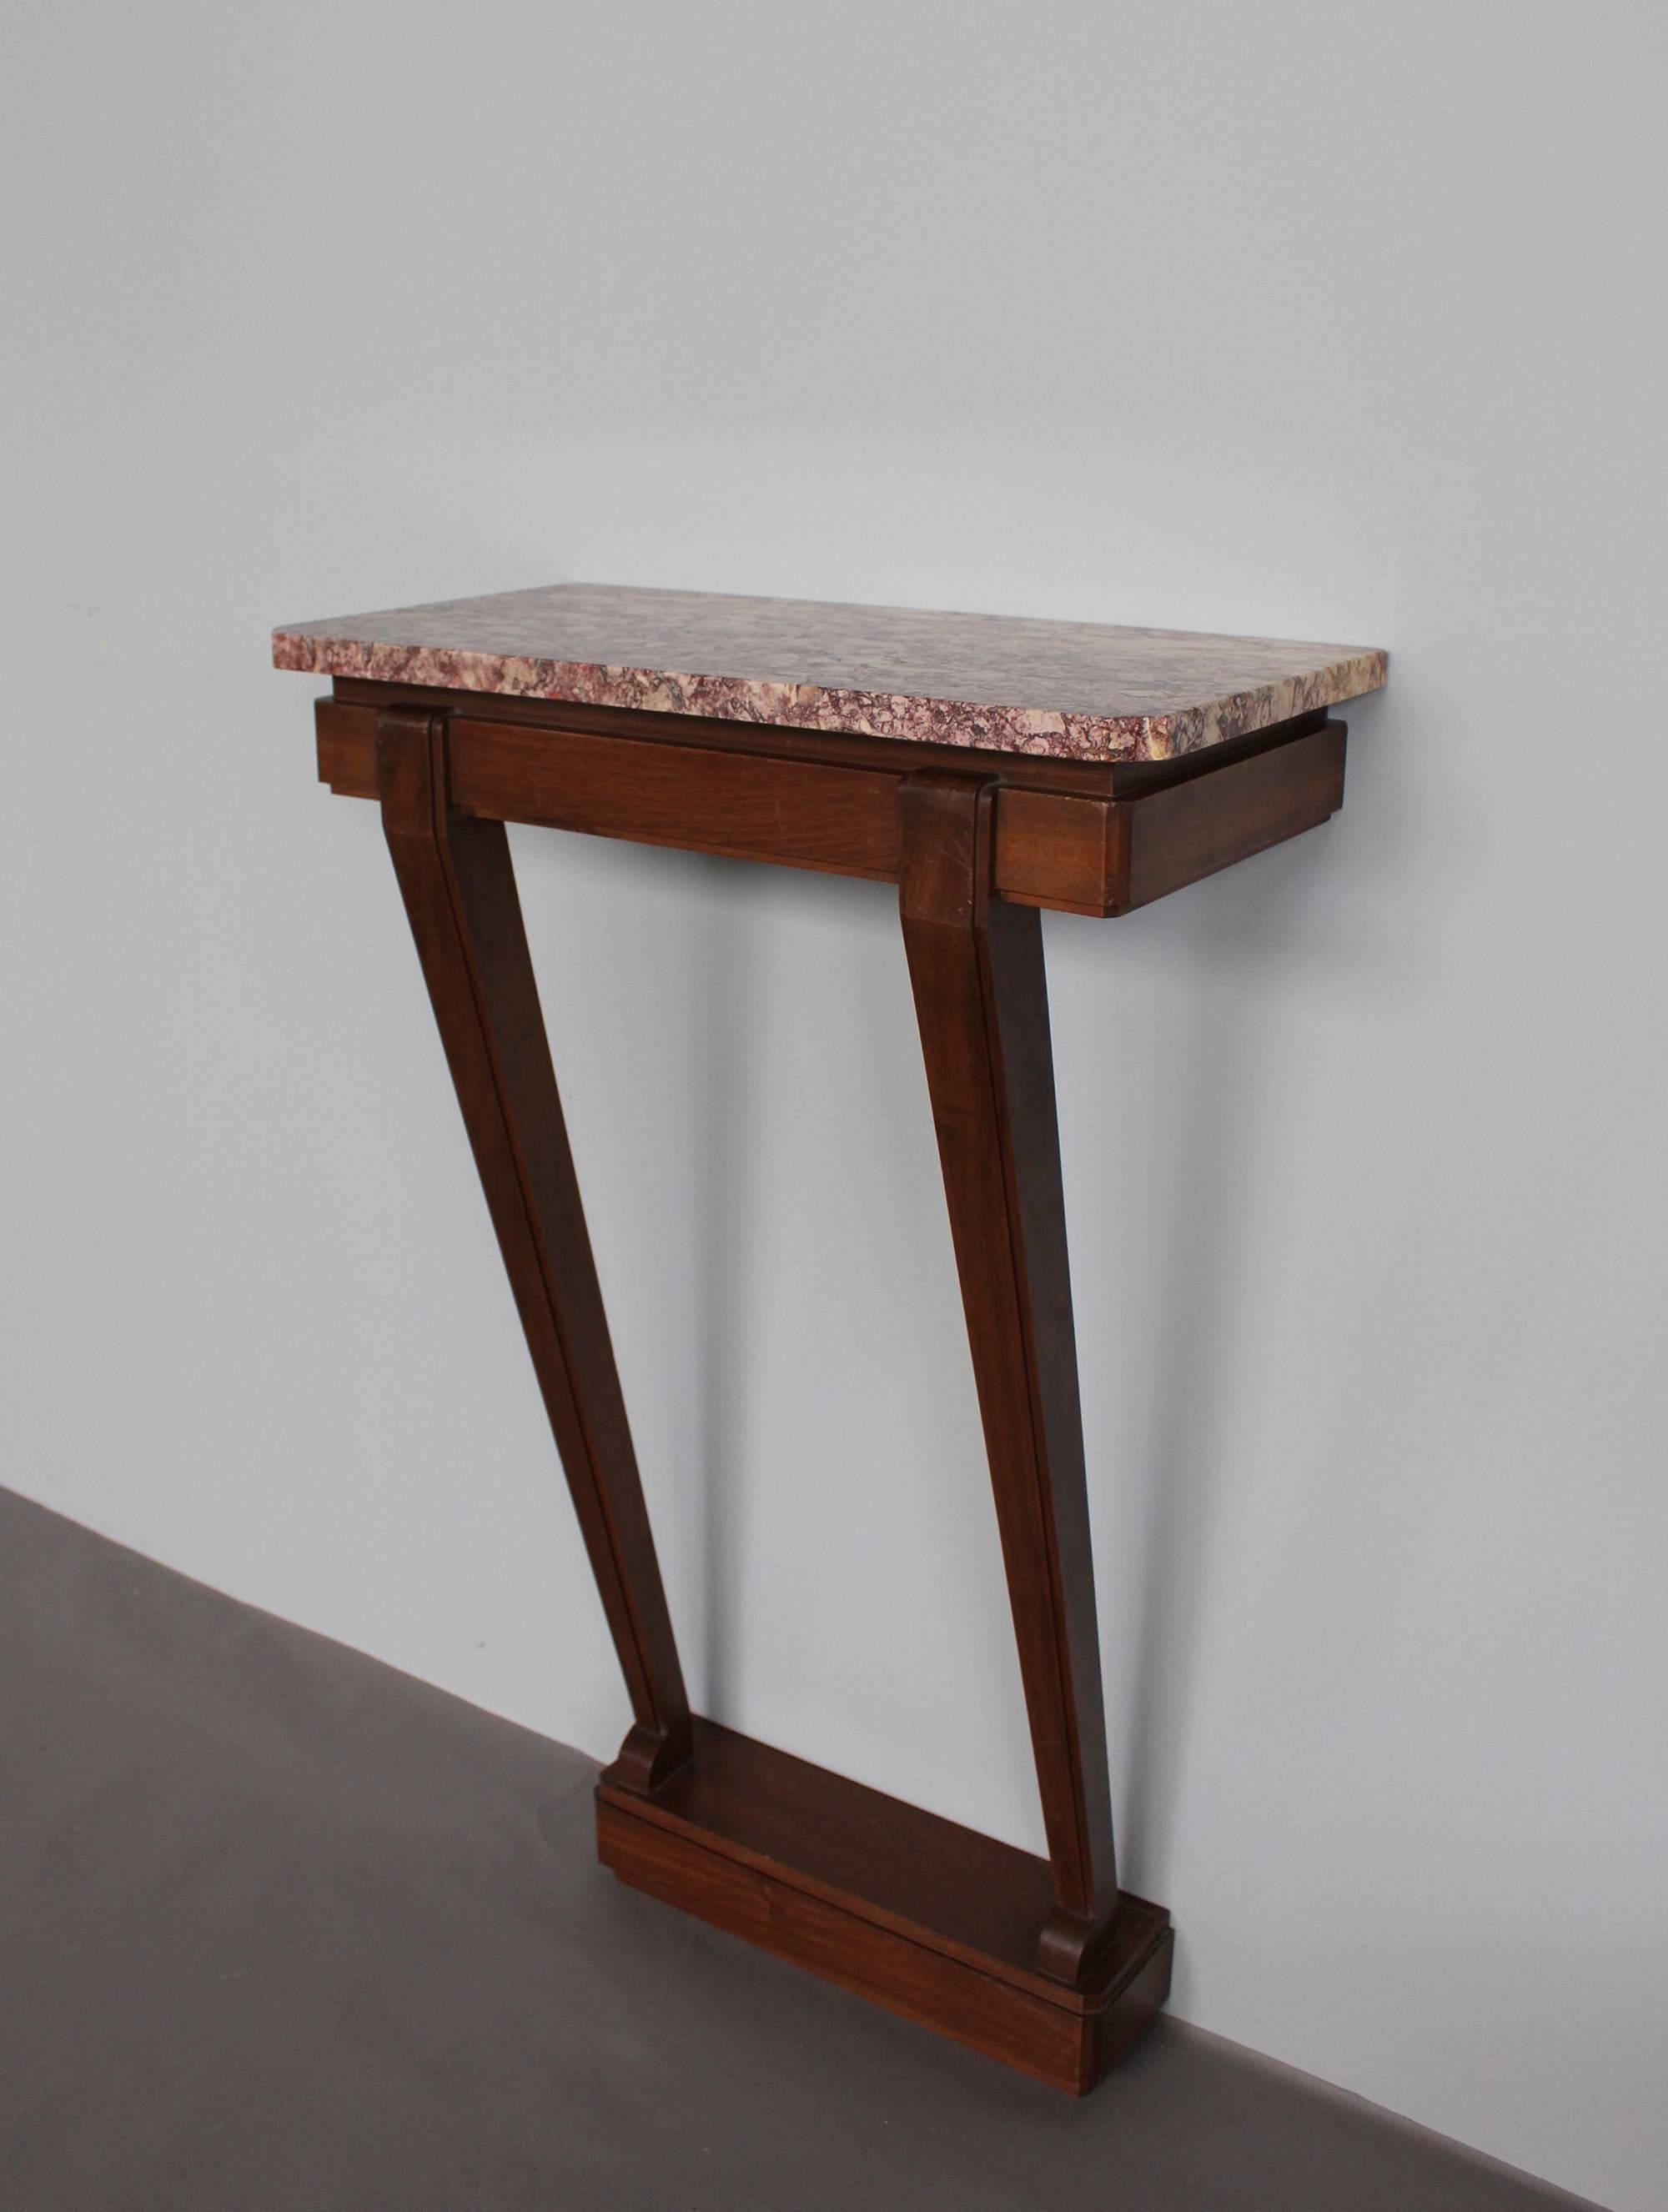 A Fine French Art Deco Mahogany Console with a Marble Top In Good Condition For Sale In Long Island City, NY